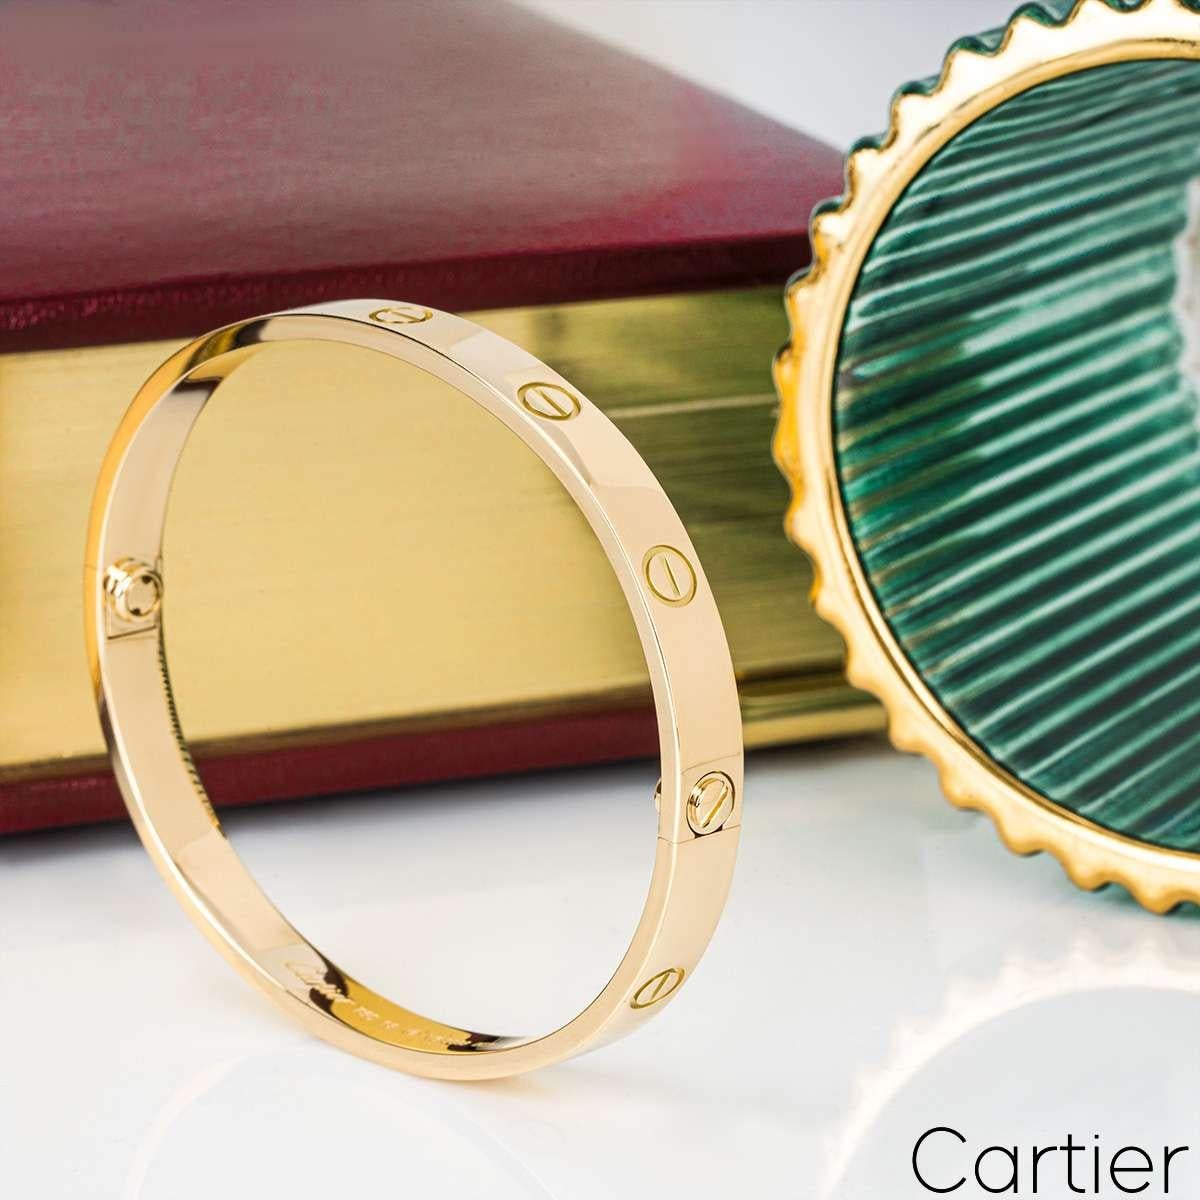 Cartier Yellow Gold Plain Love Bracelet Size 18 B6035518 In Excellent Condition For Sale In London, GB